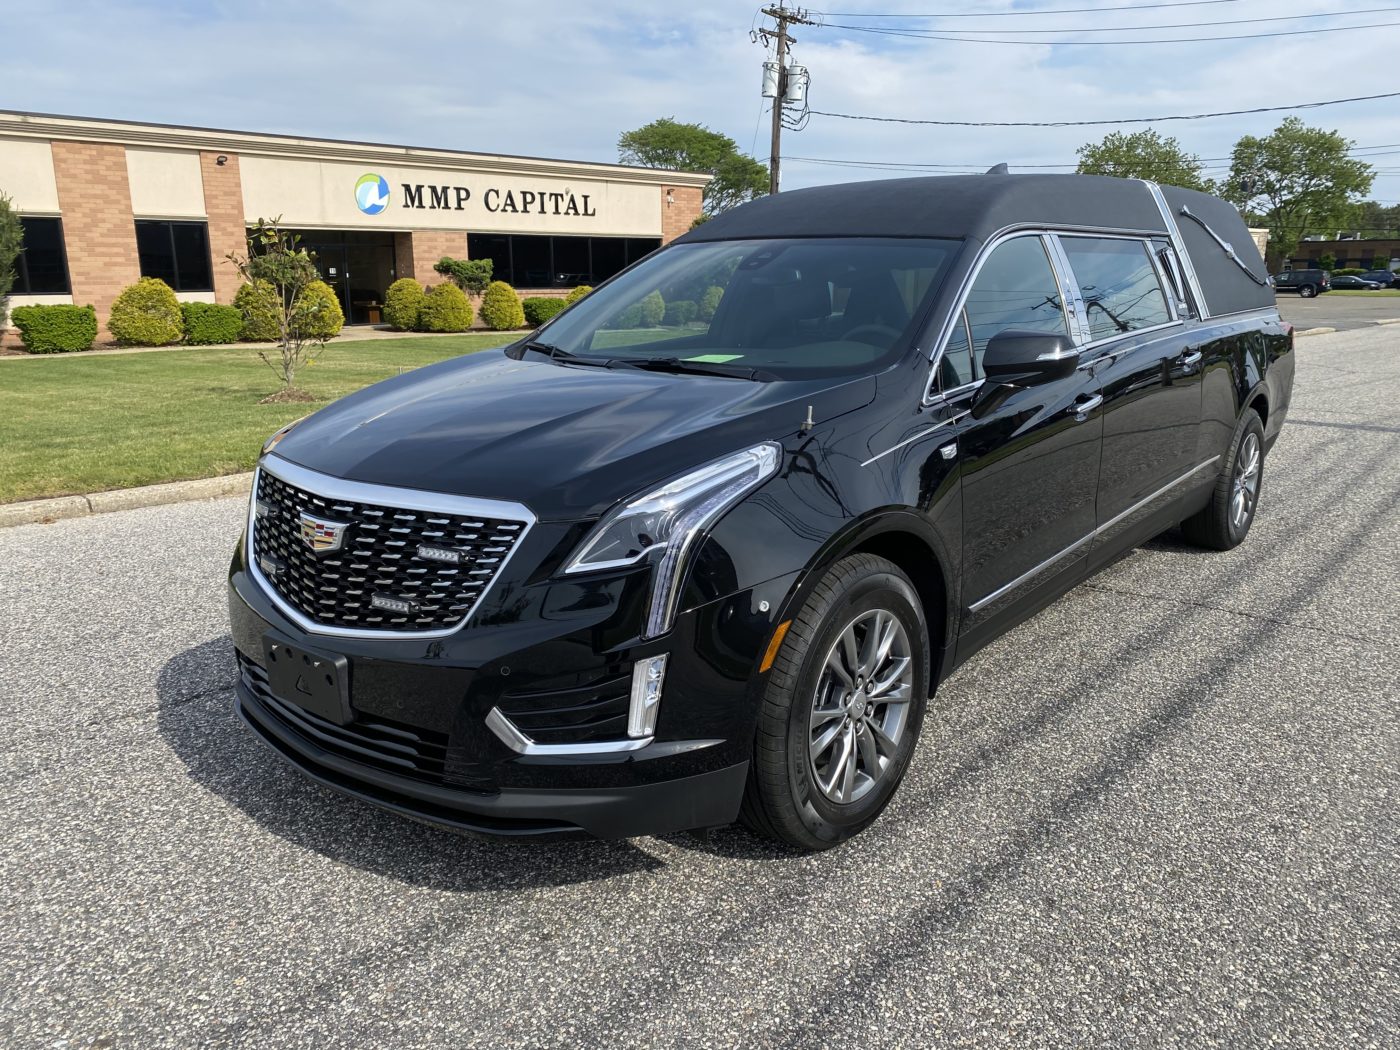 2023 CADILLAC XT5 HERITAGE FUNERAL HEARSE Specialty Hearse